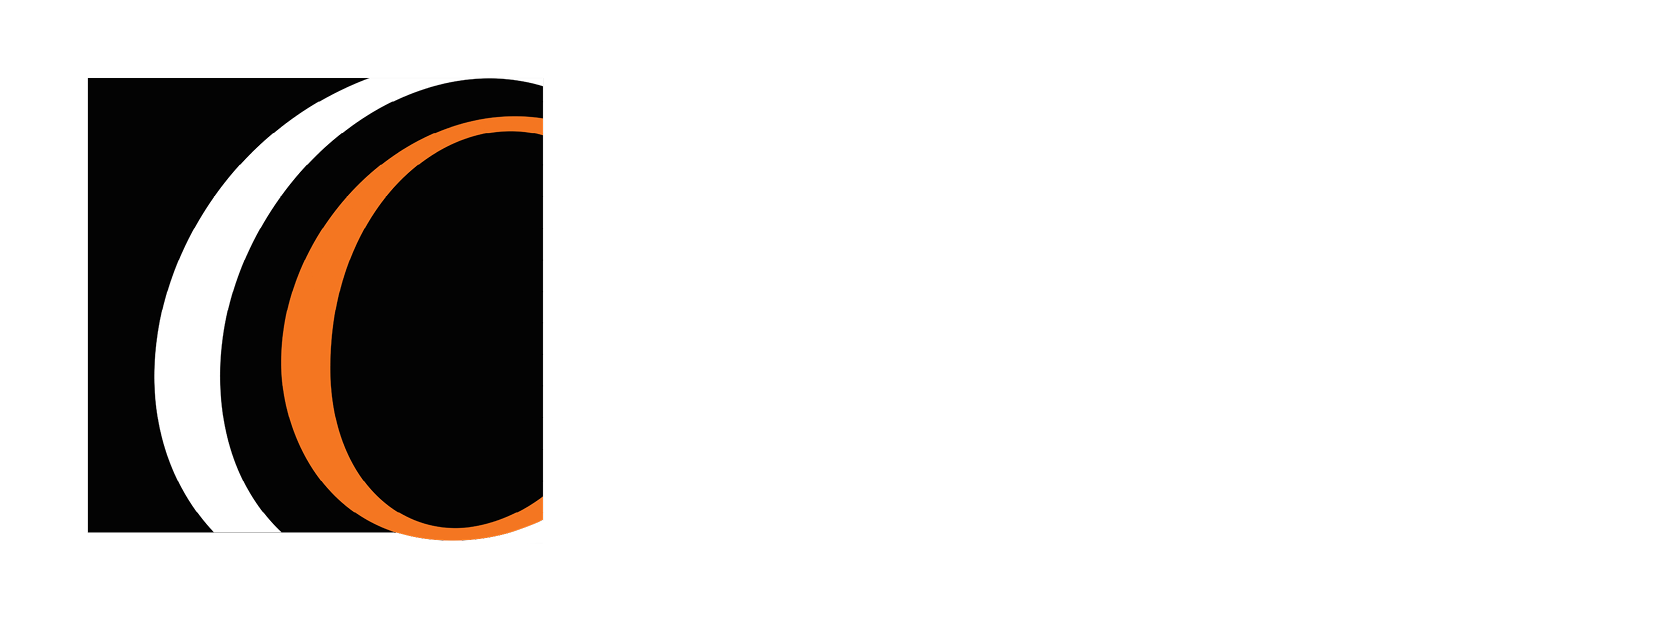 The Chamber Orchestra of Philadelphia